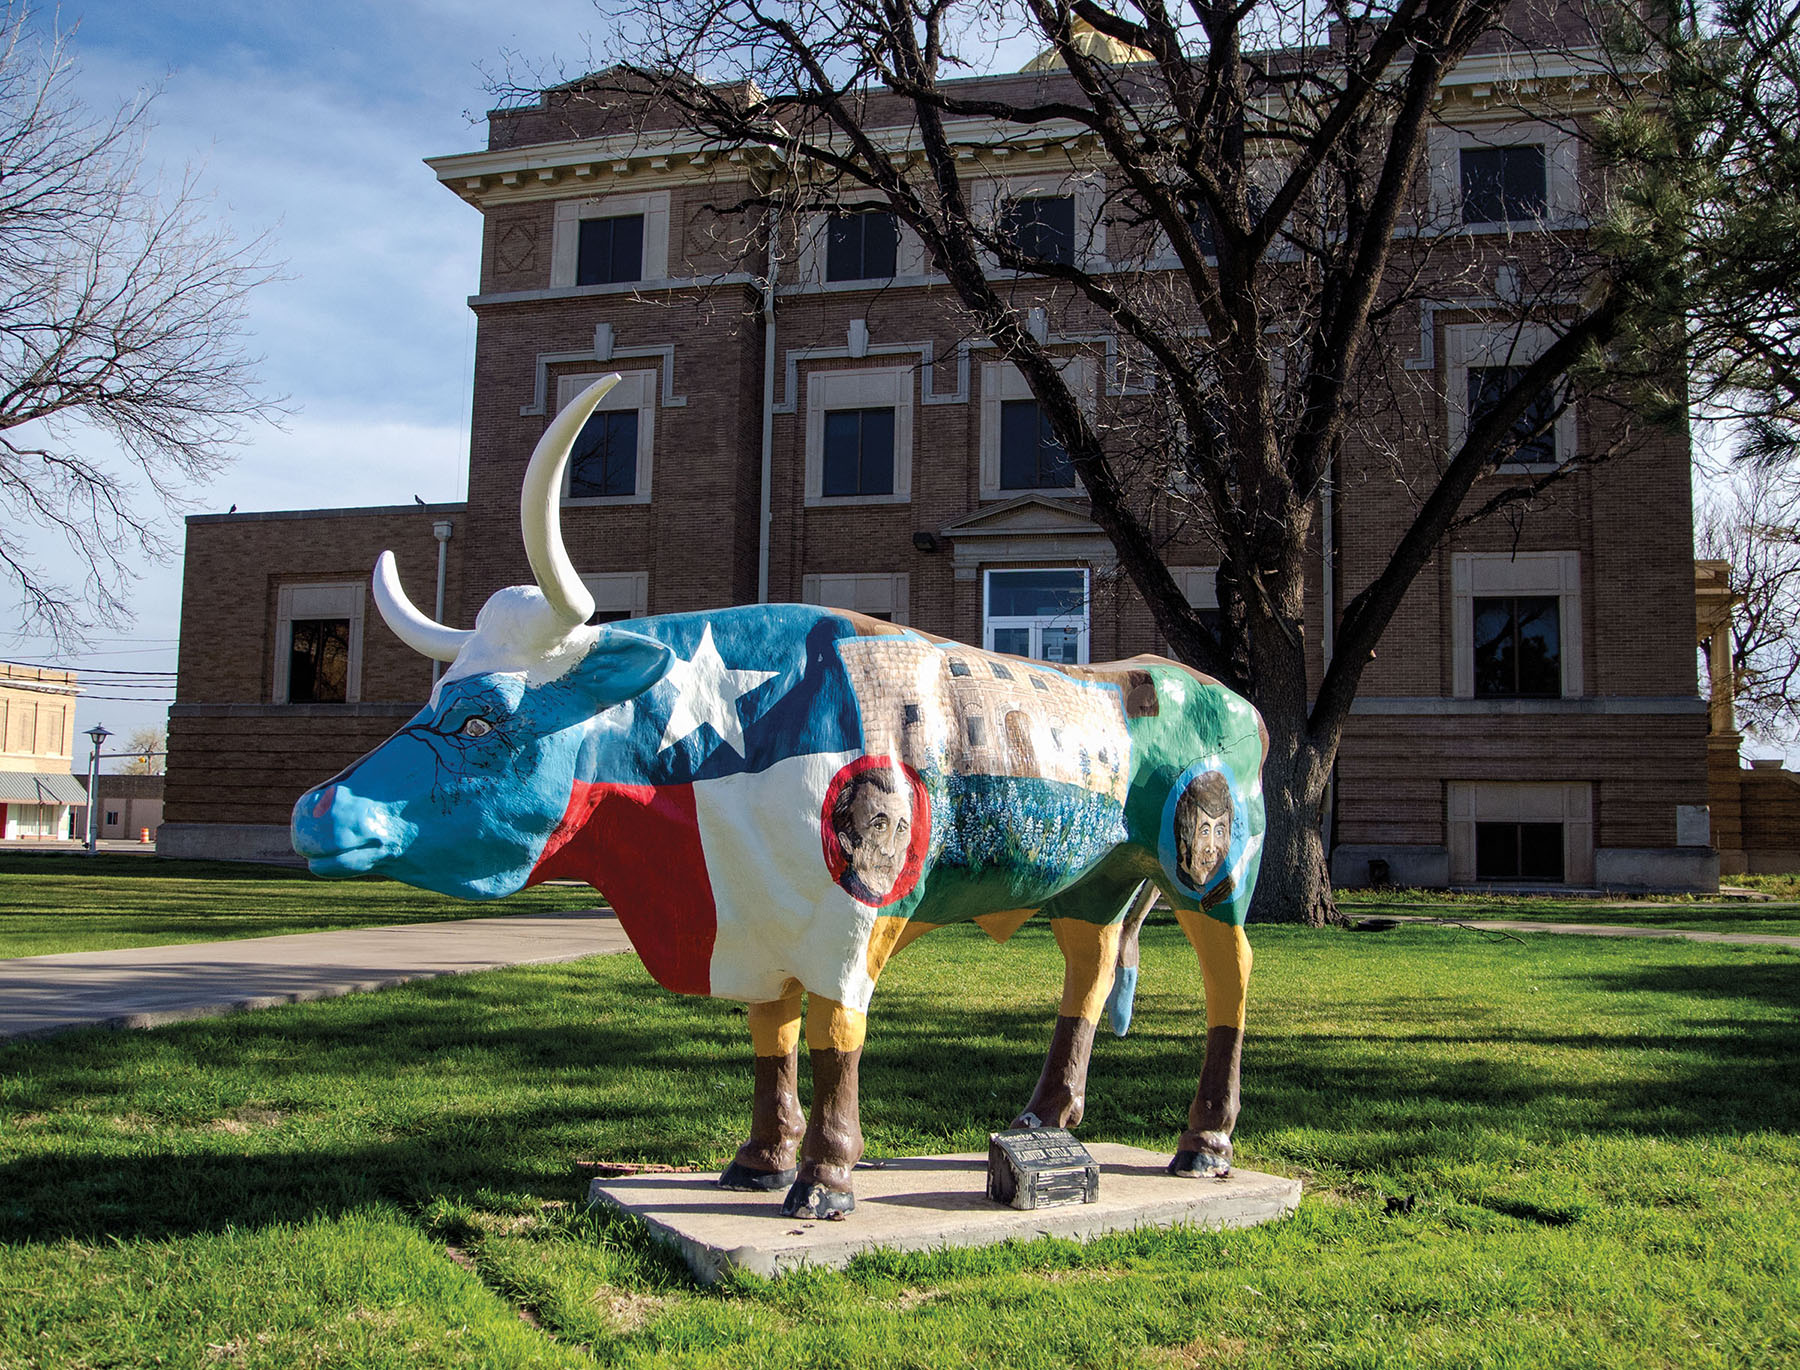 A brightly-painted cow with multiple symbols, including the flag of the state of Texas